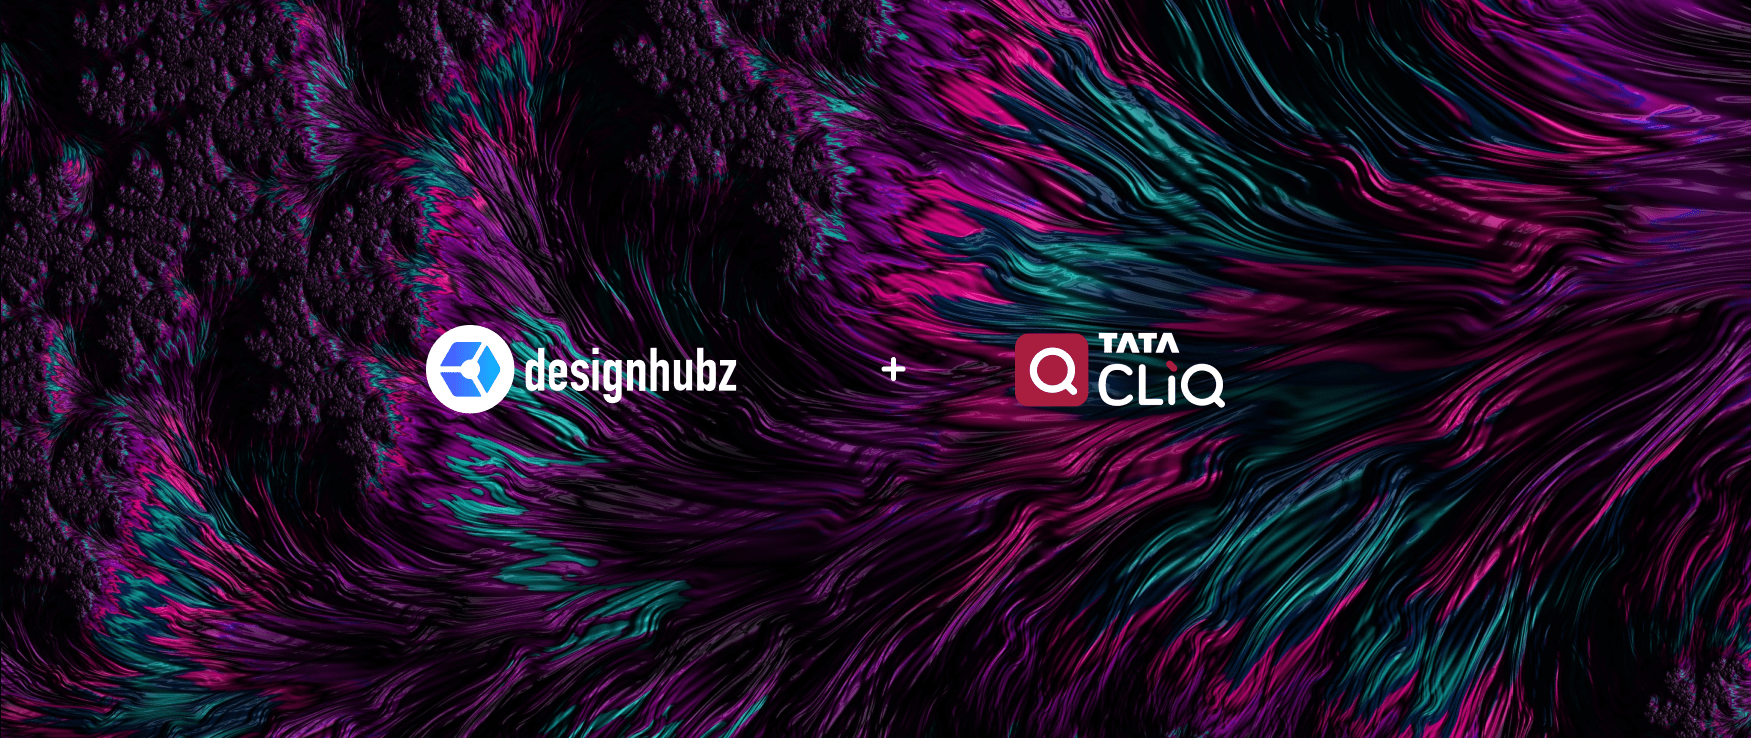 Designhubz collaborates with India’s TATA Cliq for eyewear and makeup Virtual Try-On Features (Augmented Reality Try-On)